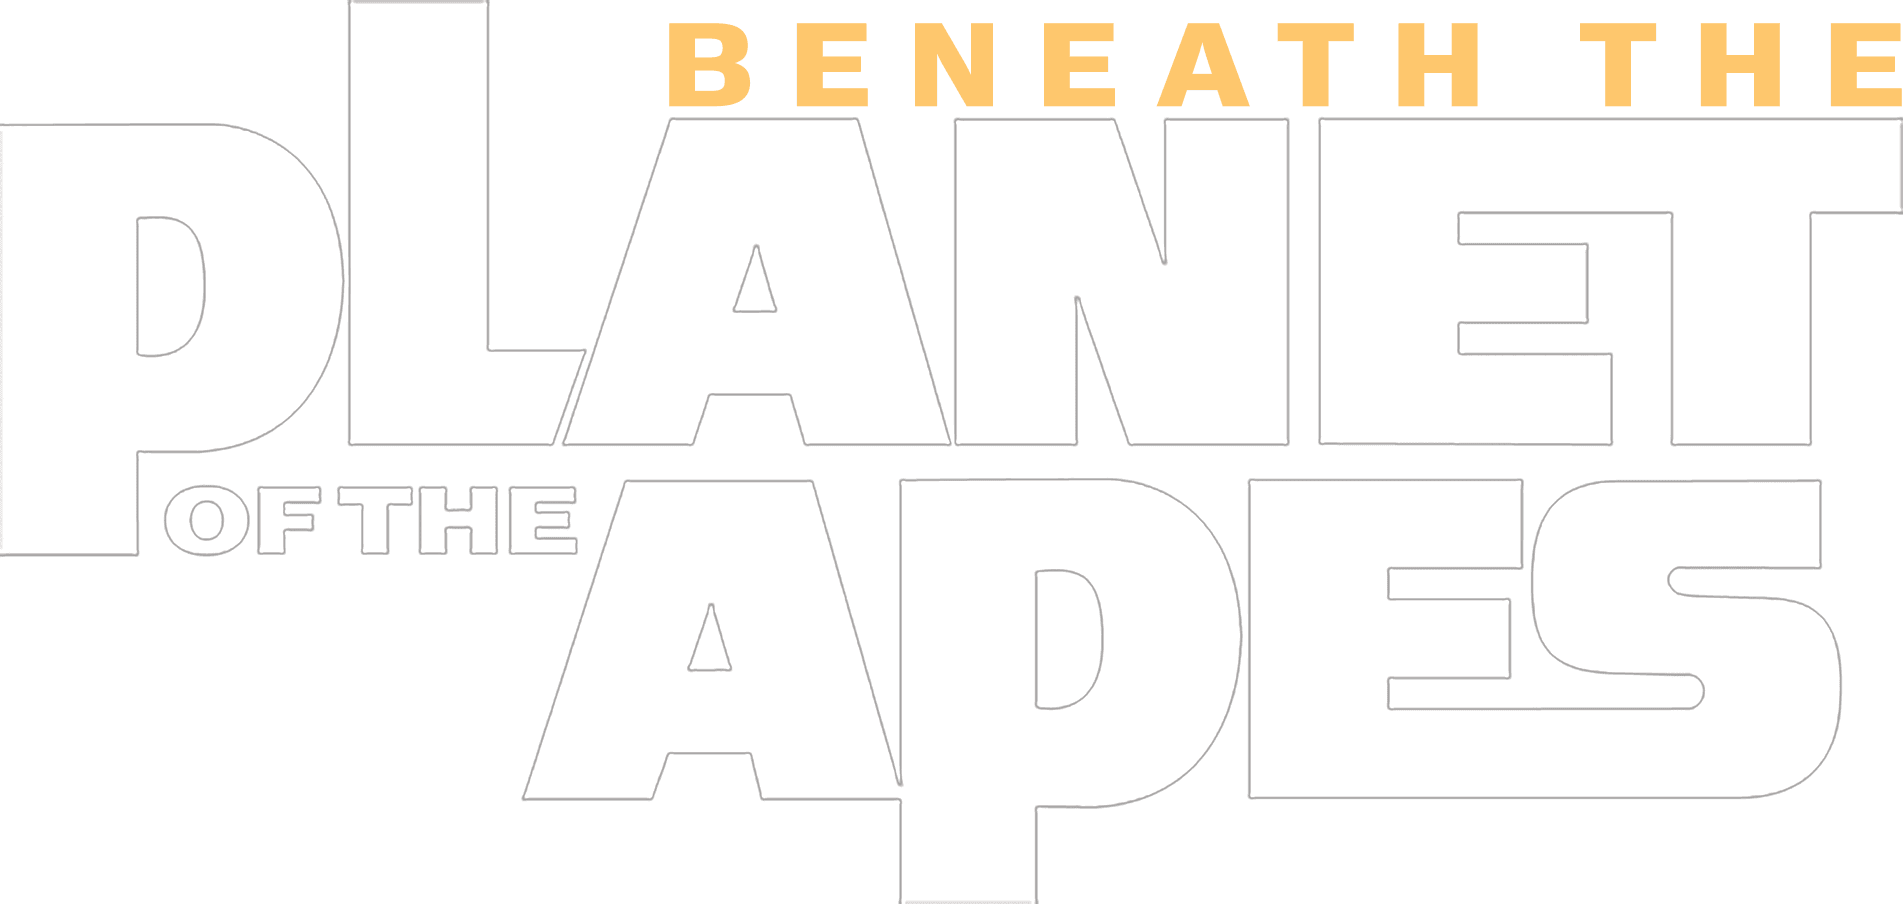 Beneath the Planet of the Apes logo